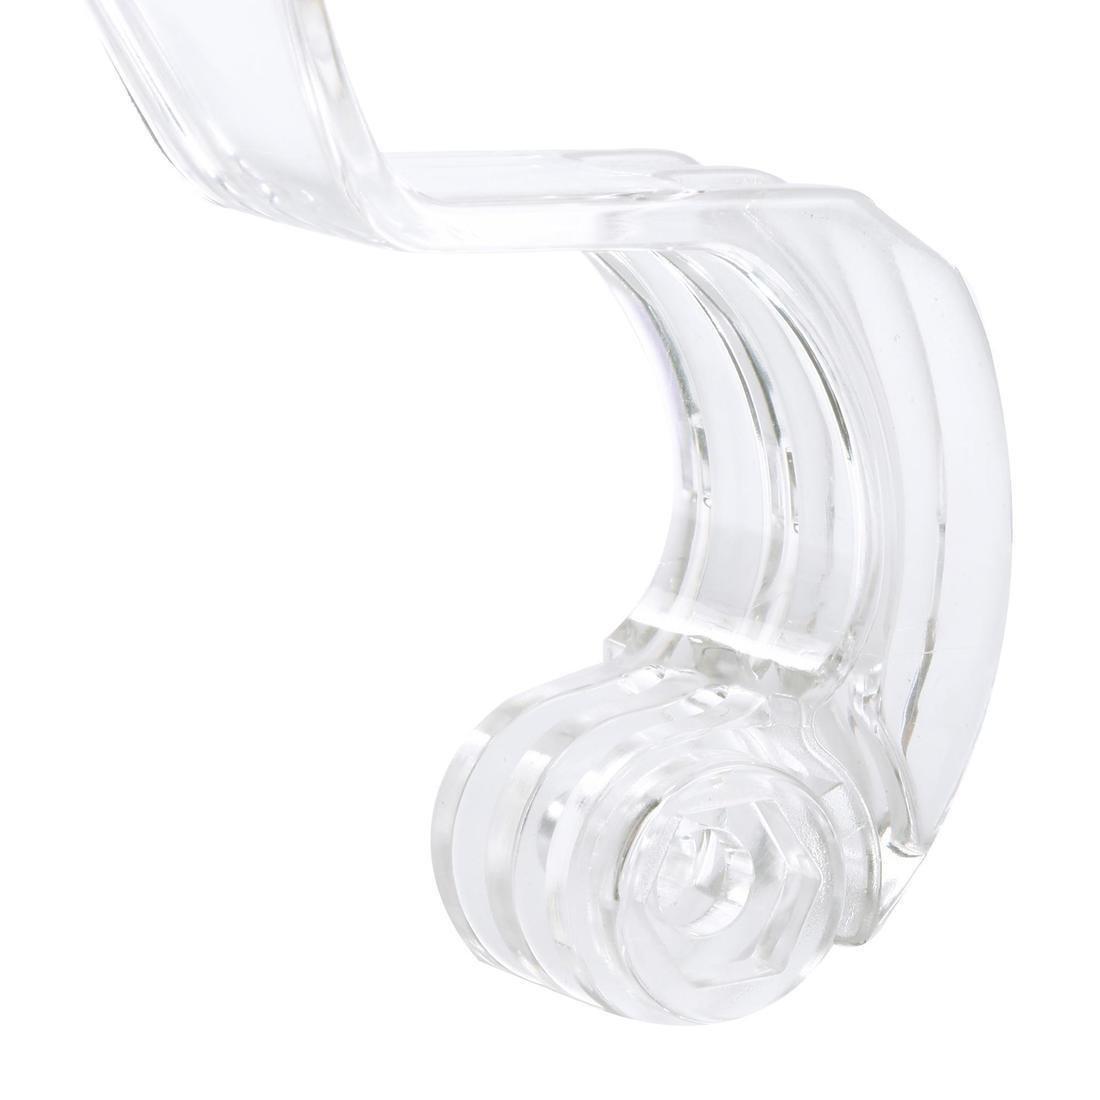 SUBEA - Camera Mount For The First Version Of The Easybreath Mask Without Nut.